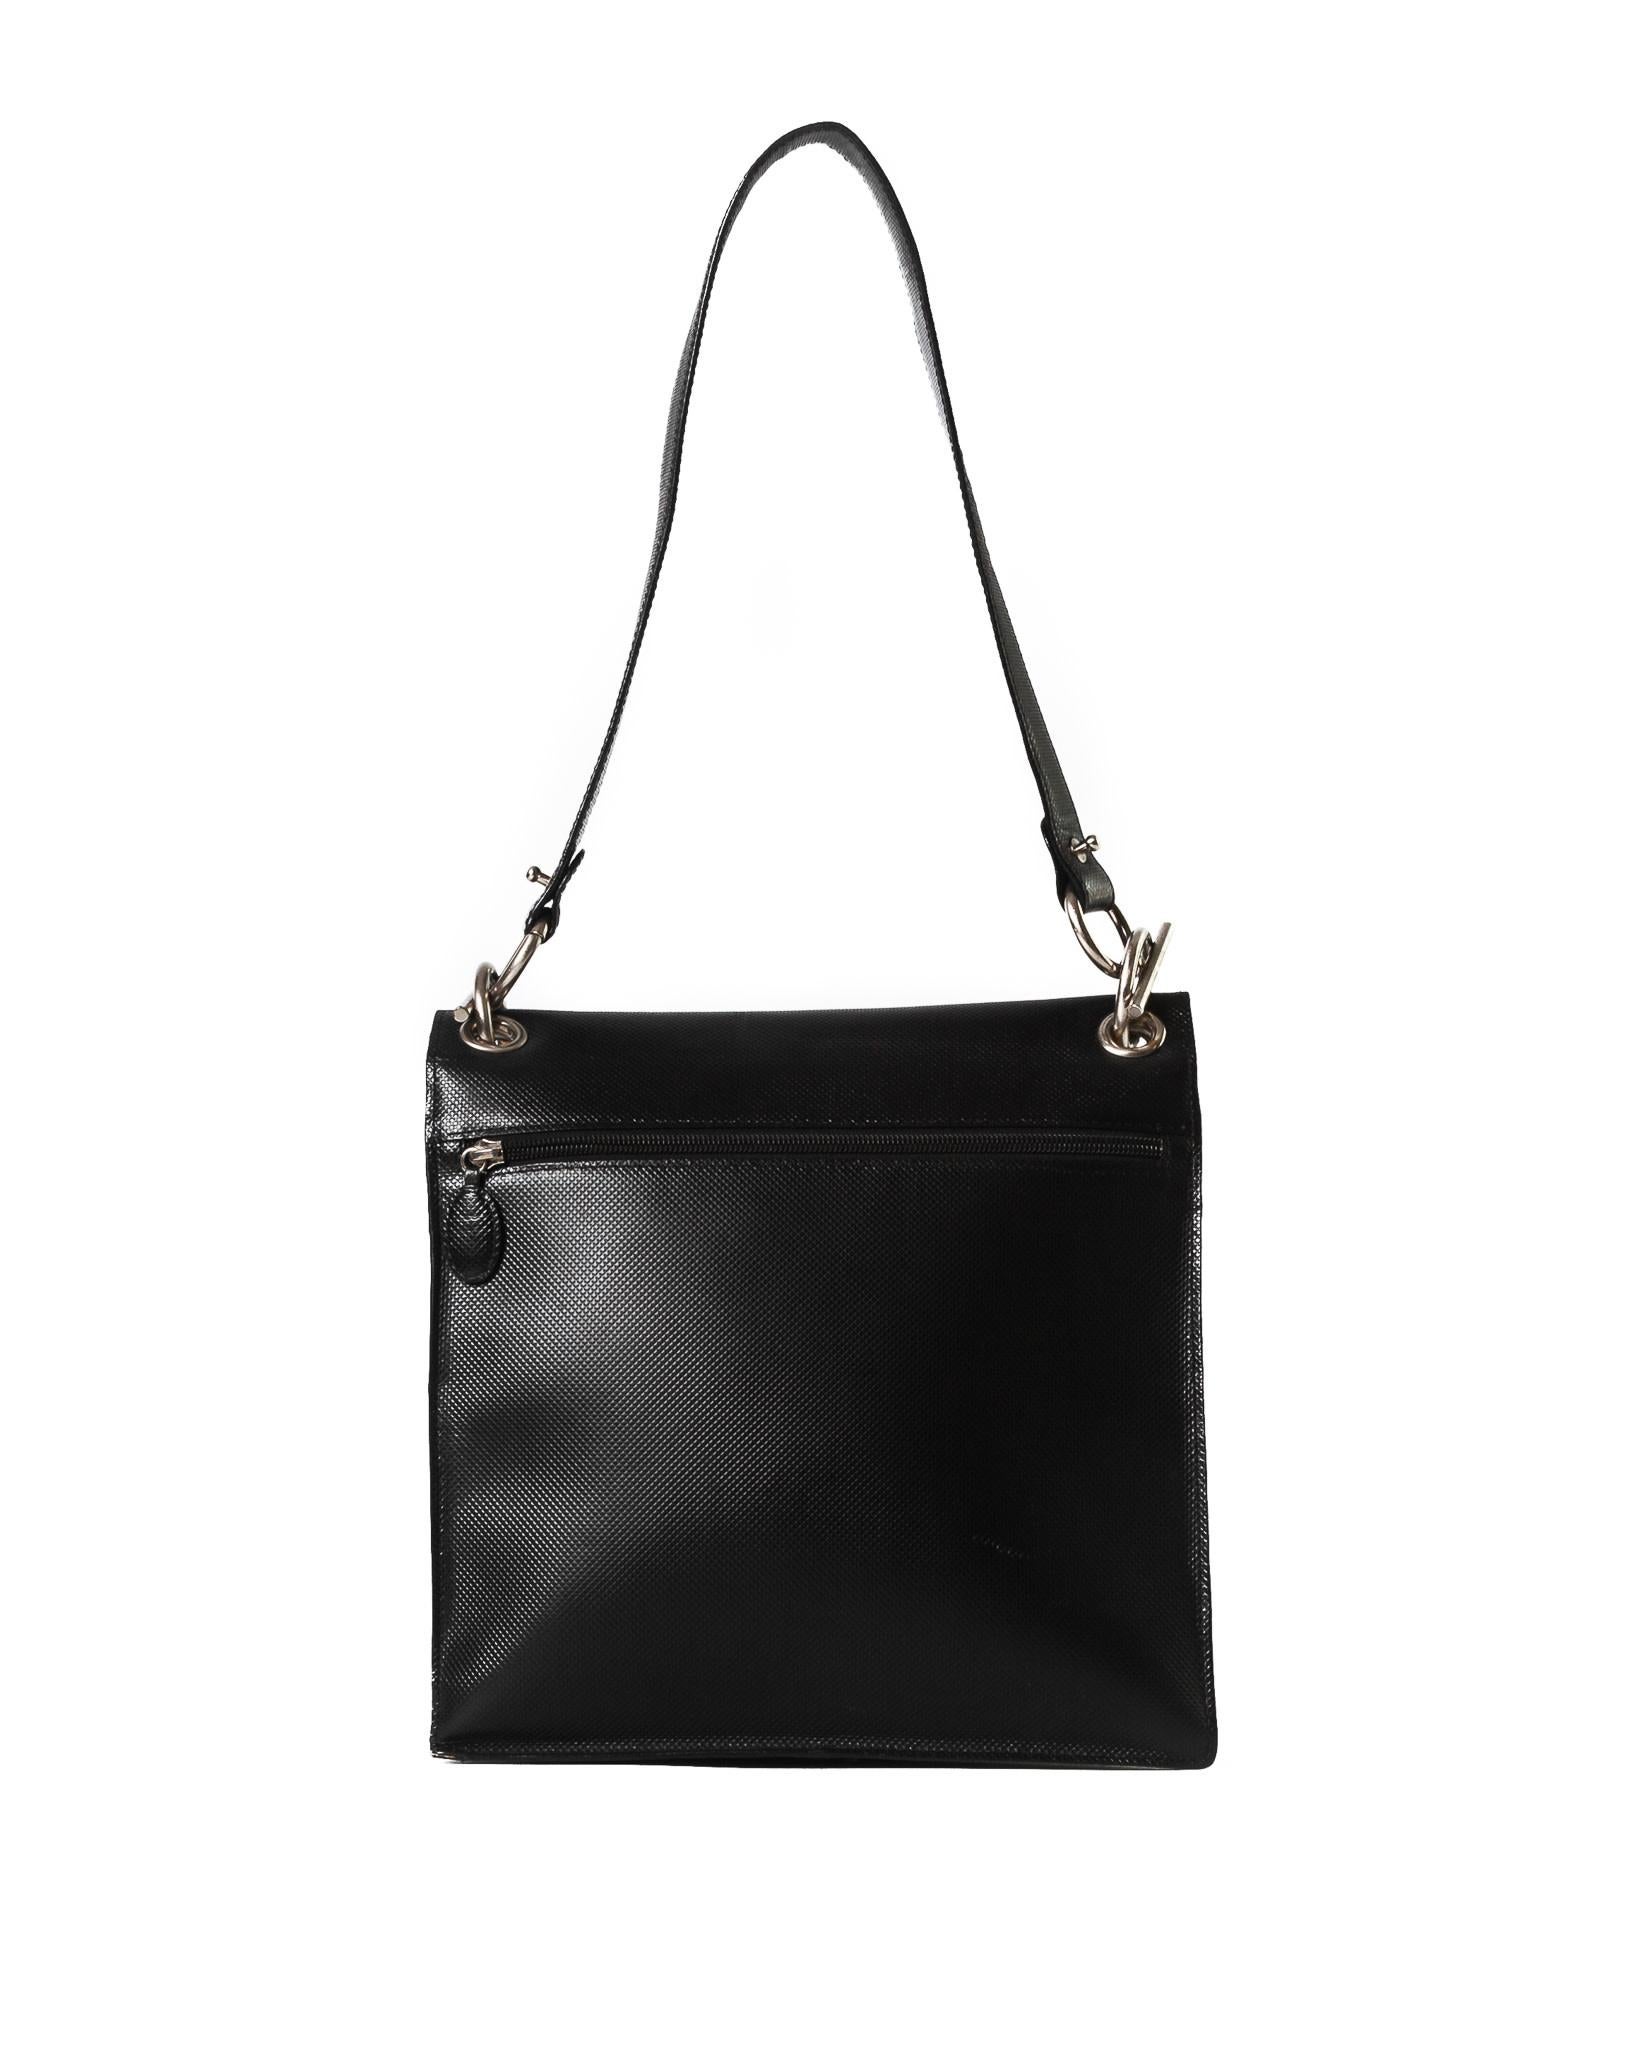 This Bottega bag is made with textured leather and features a large front flap, attachable shoulder strap and a back zip pocket. The expandable large interior compartment has jacquard fabric lining with logo and is partitioned with a fabric zip